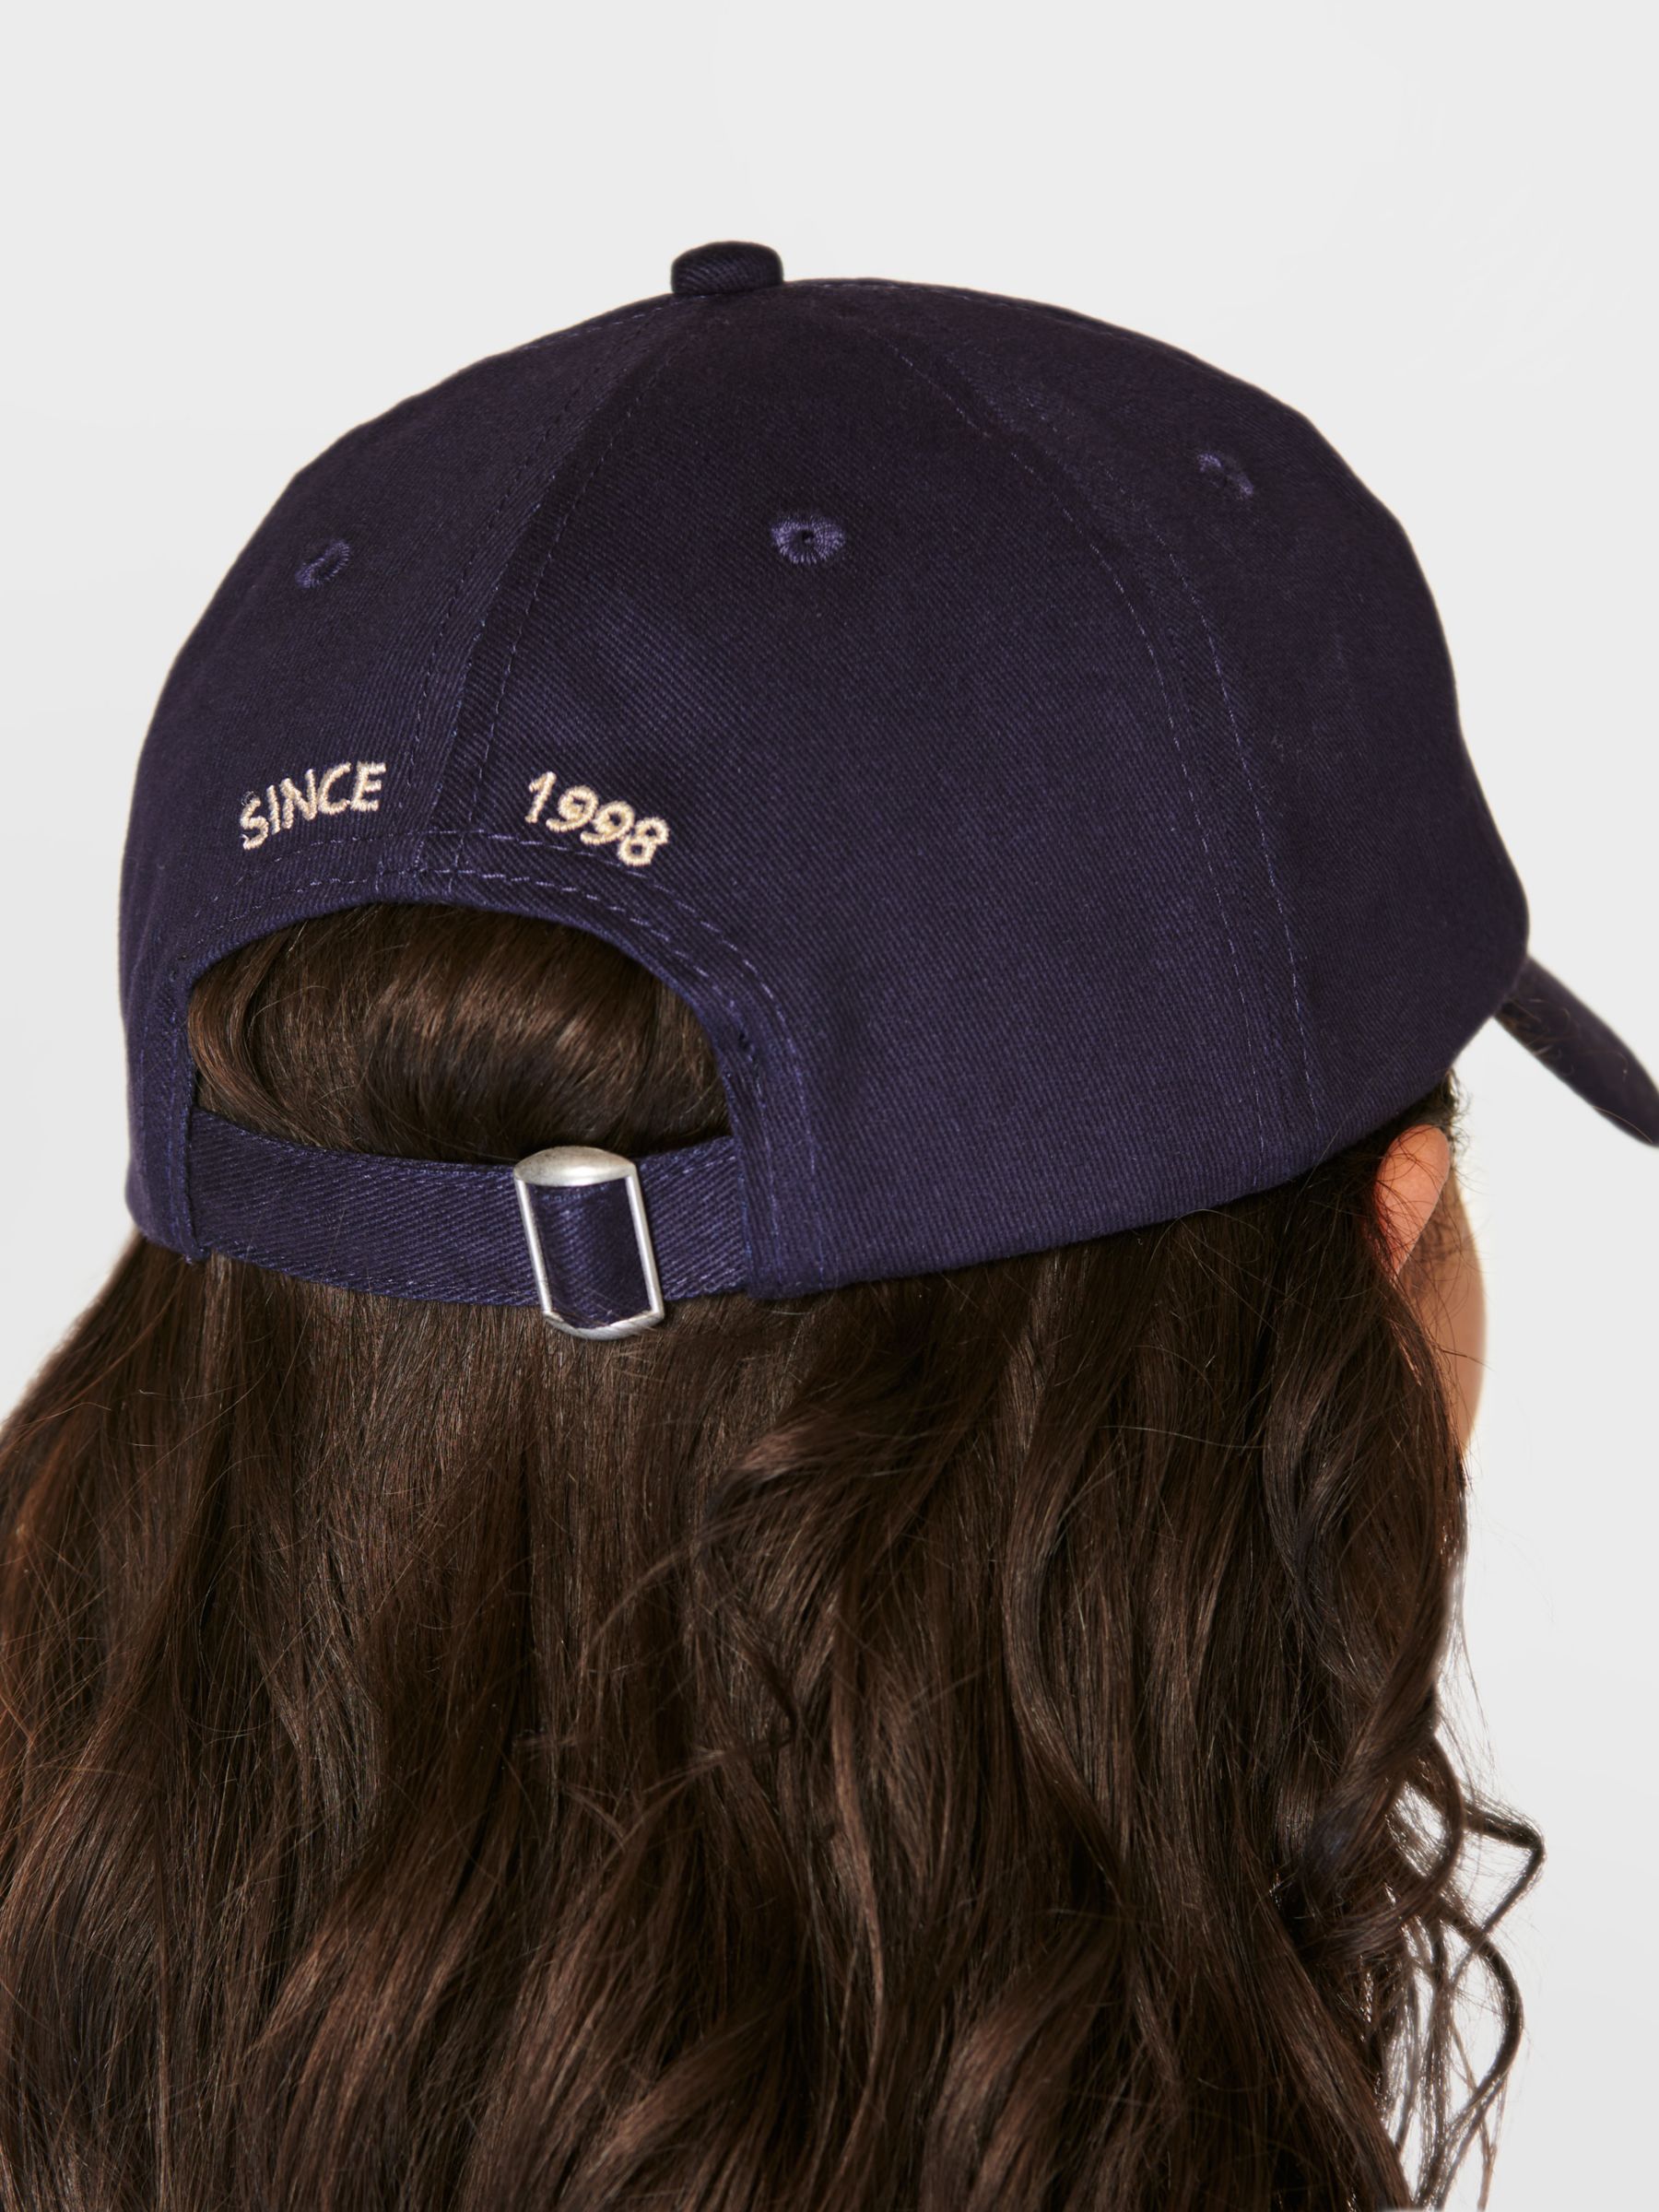 Sweaty Betty Embroidered Slogan Cap, Navy, One Size